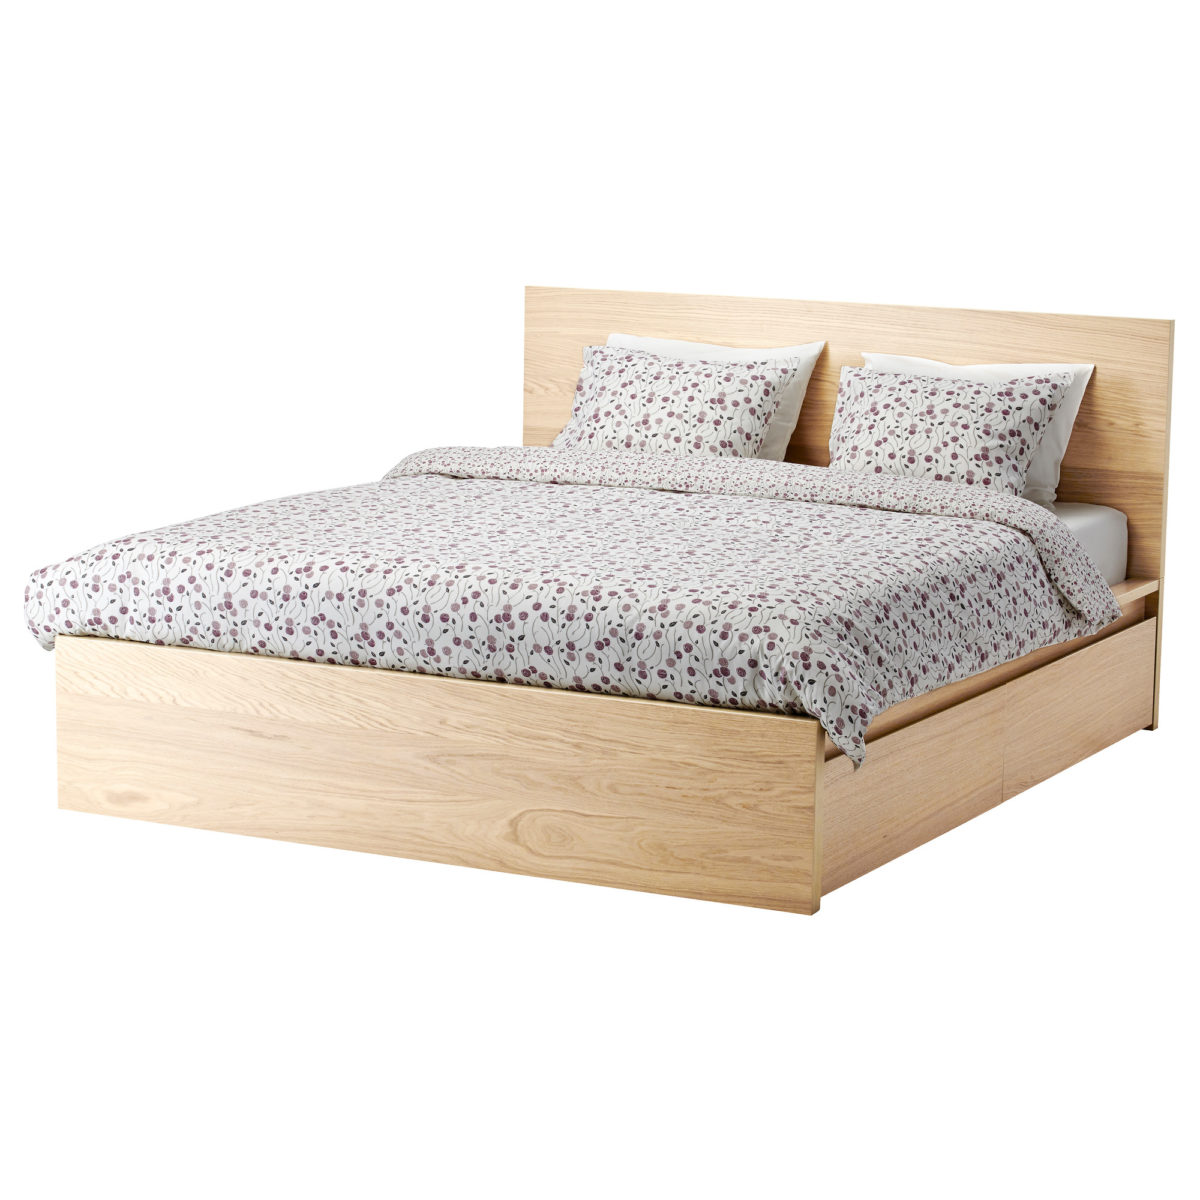 IKEA Malm Bed Frame Review